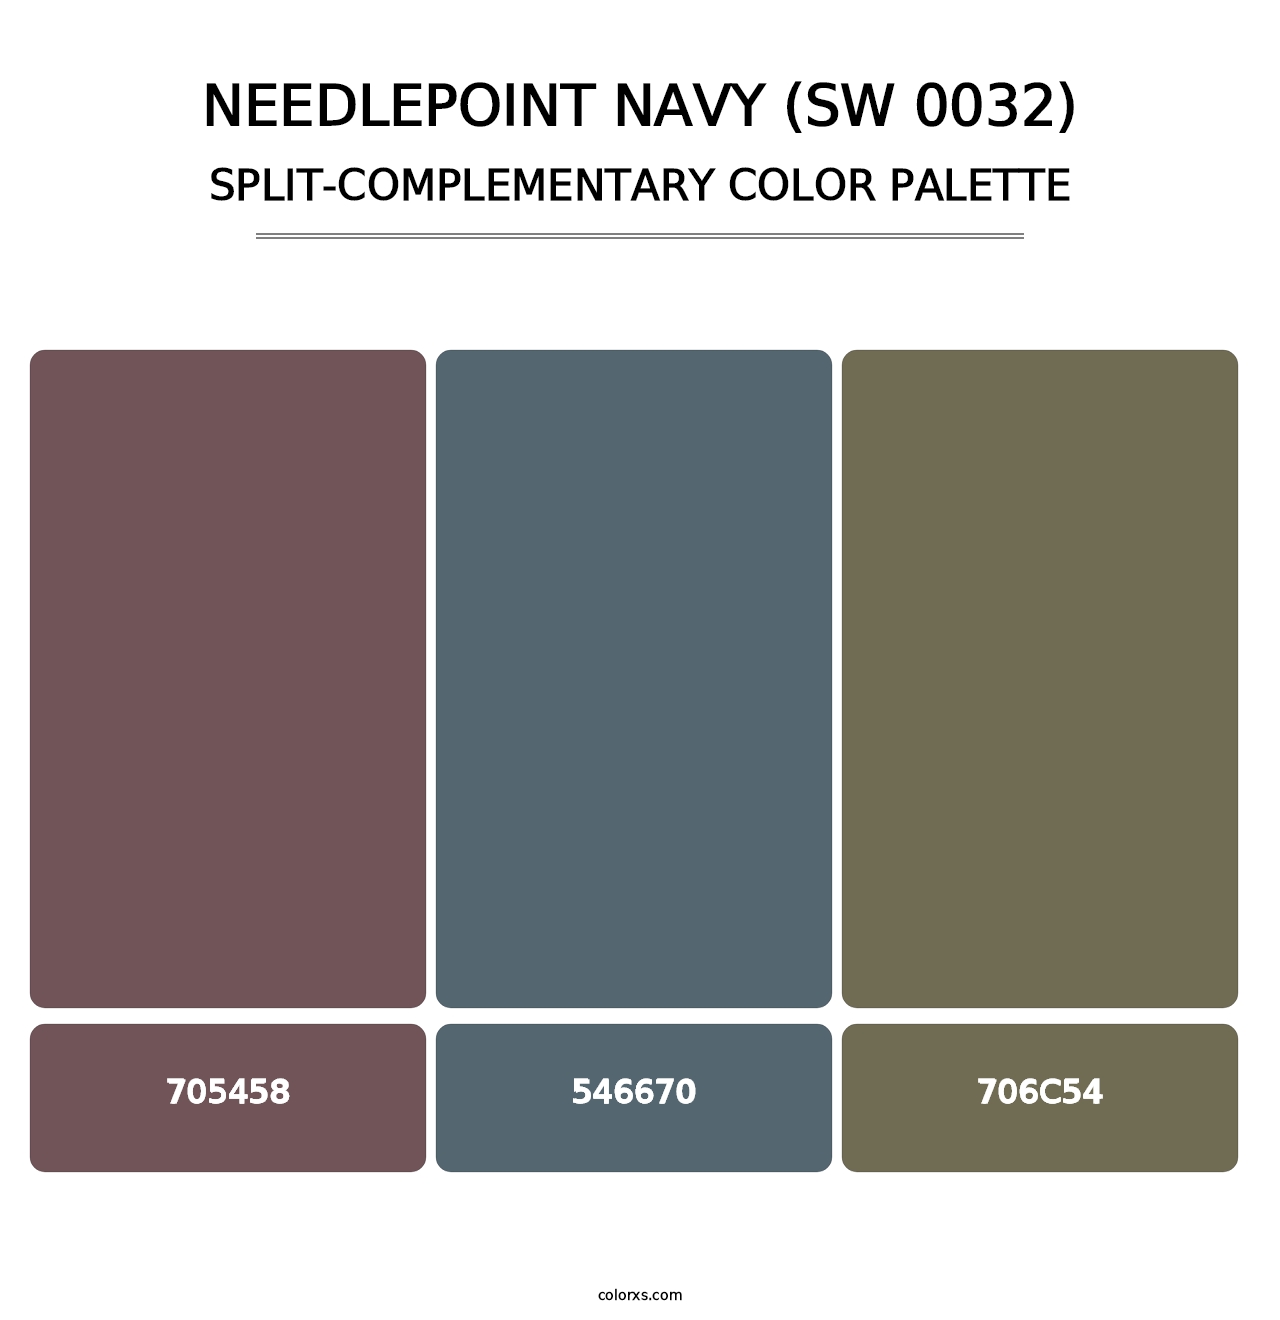 Needlepoint Navy (SW 0032) - Split-Complementary Color Palette